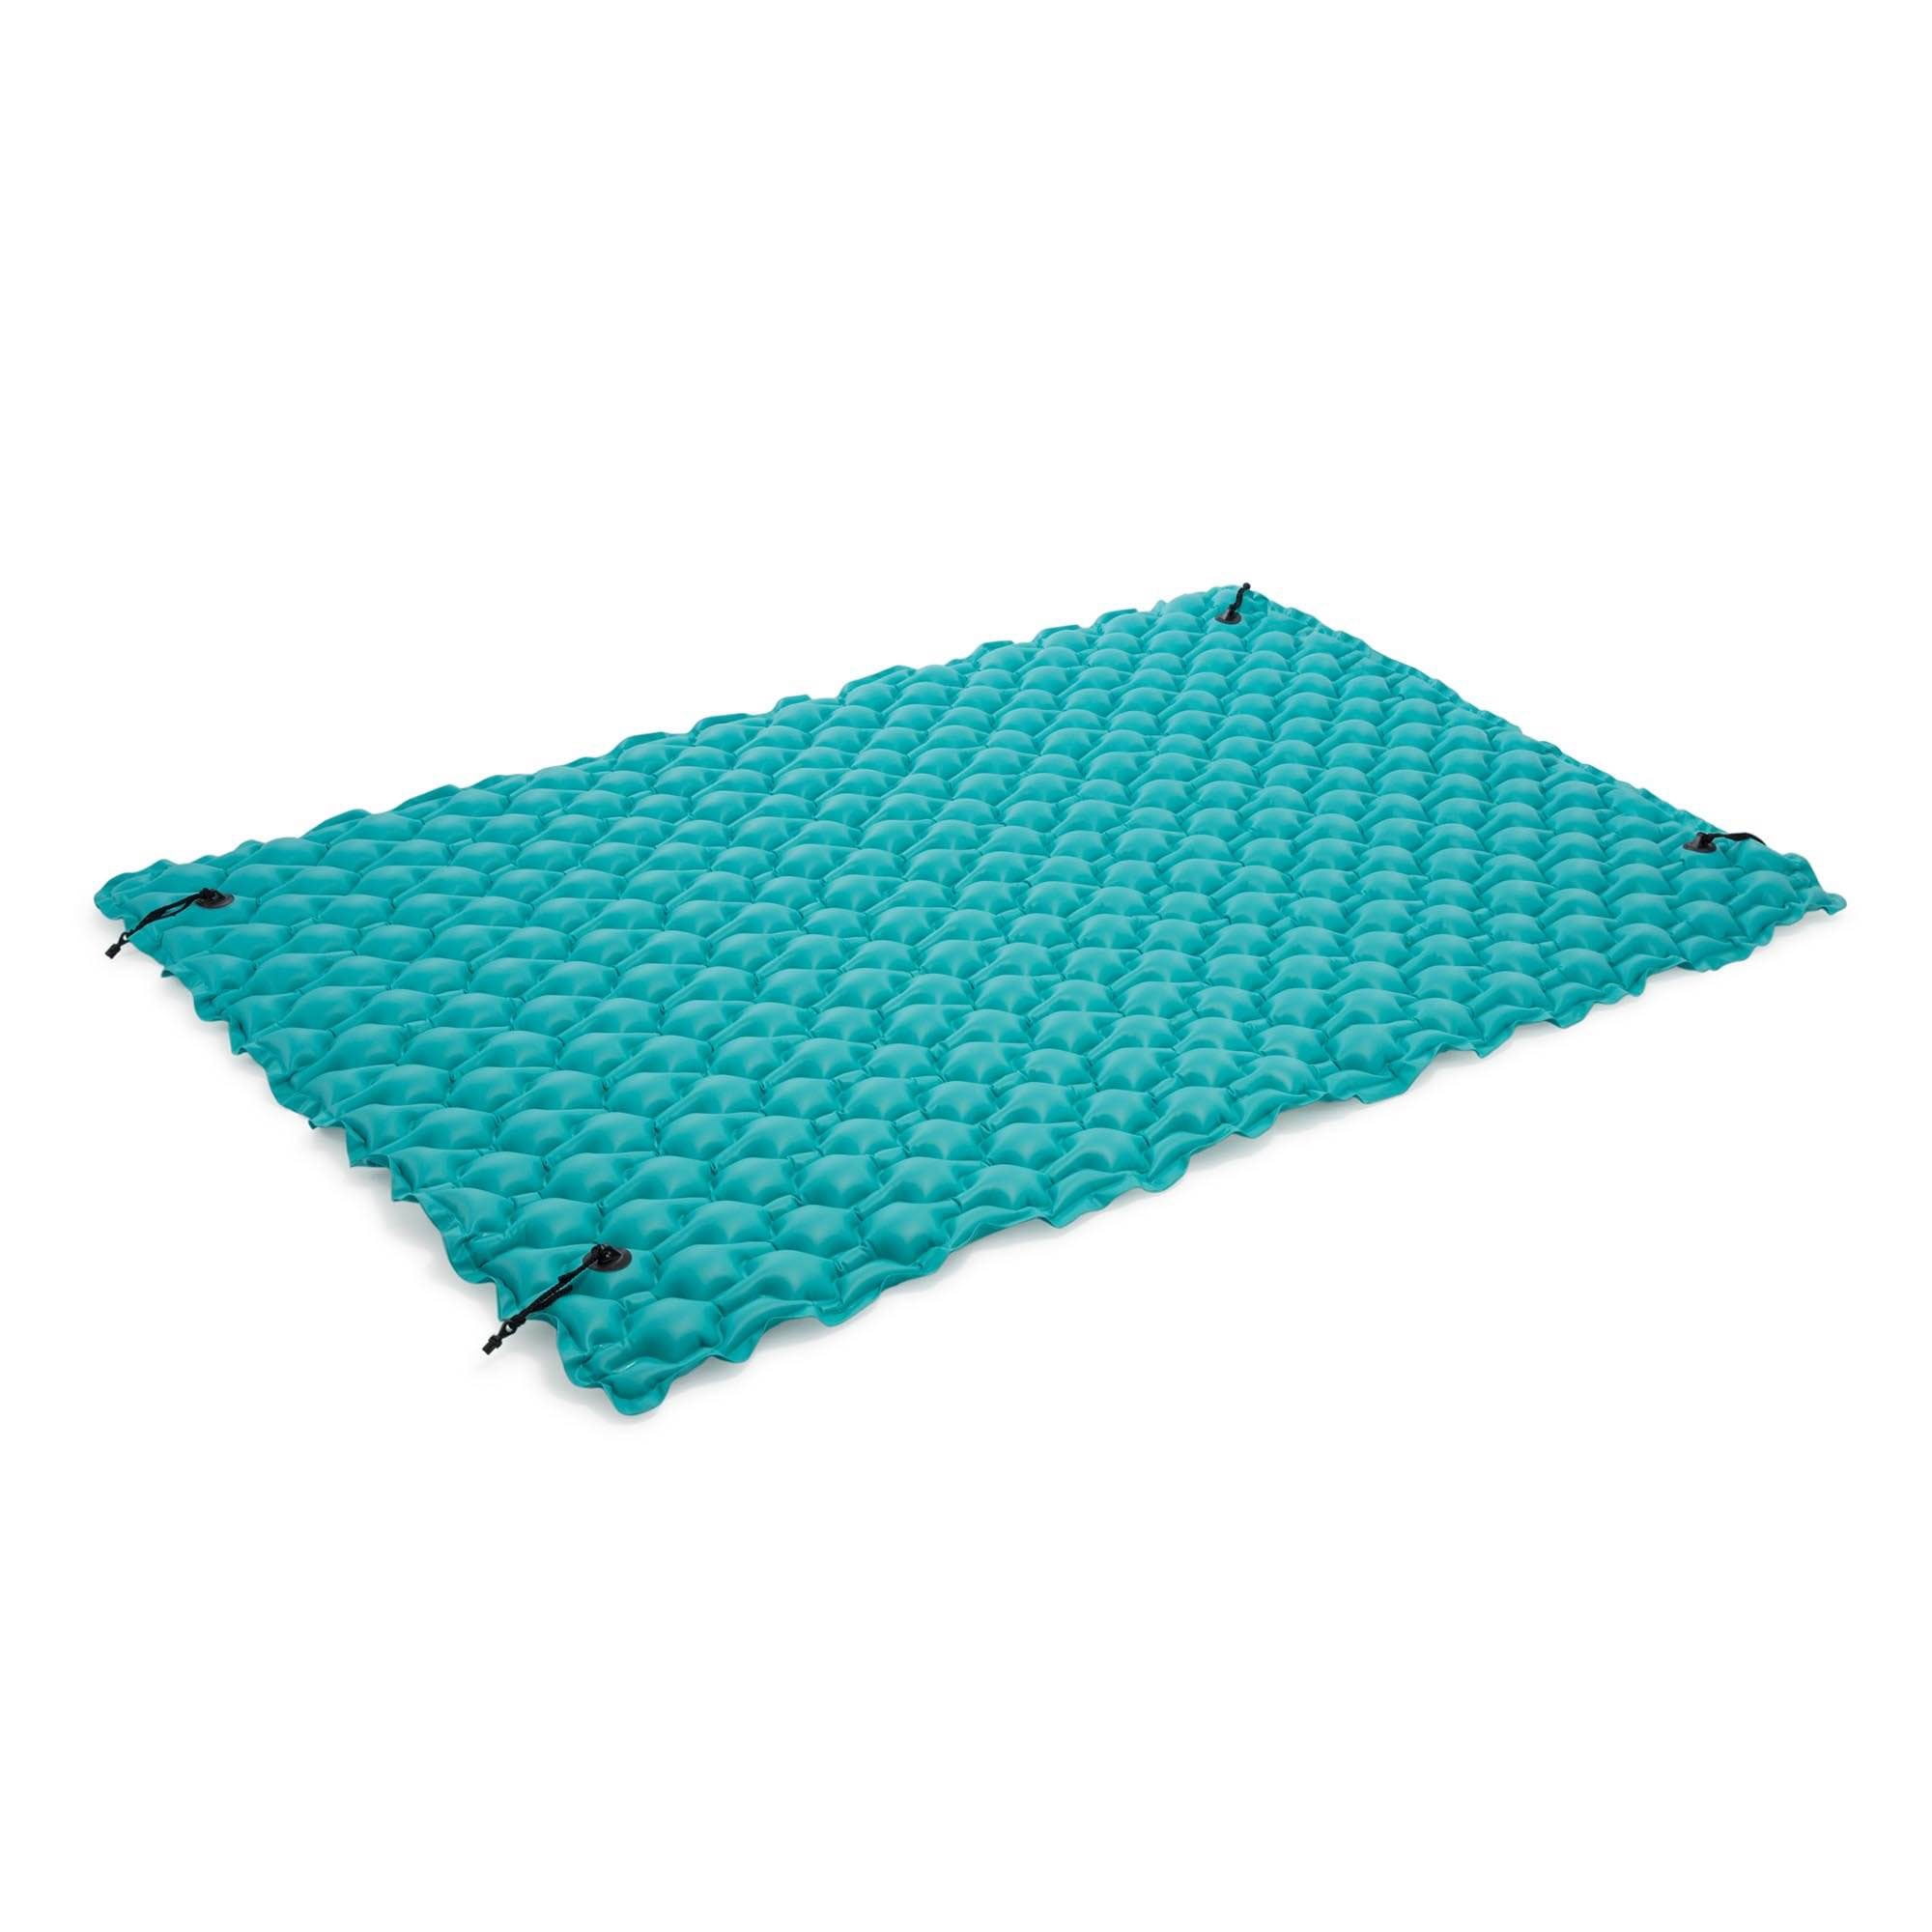 Intex Giant Inflatable Floating Mat, Blue